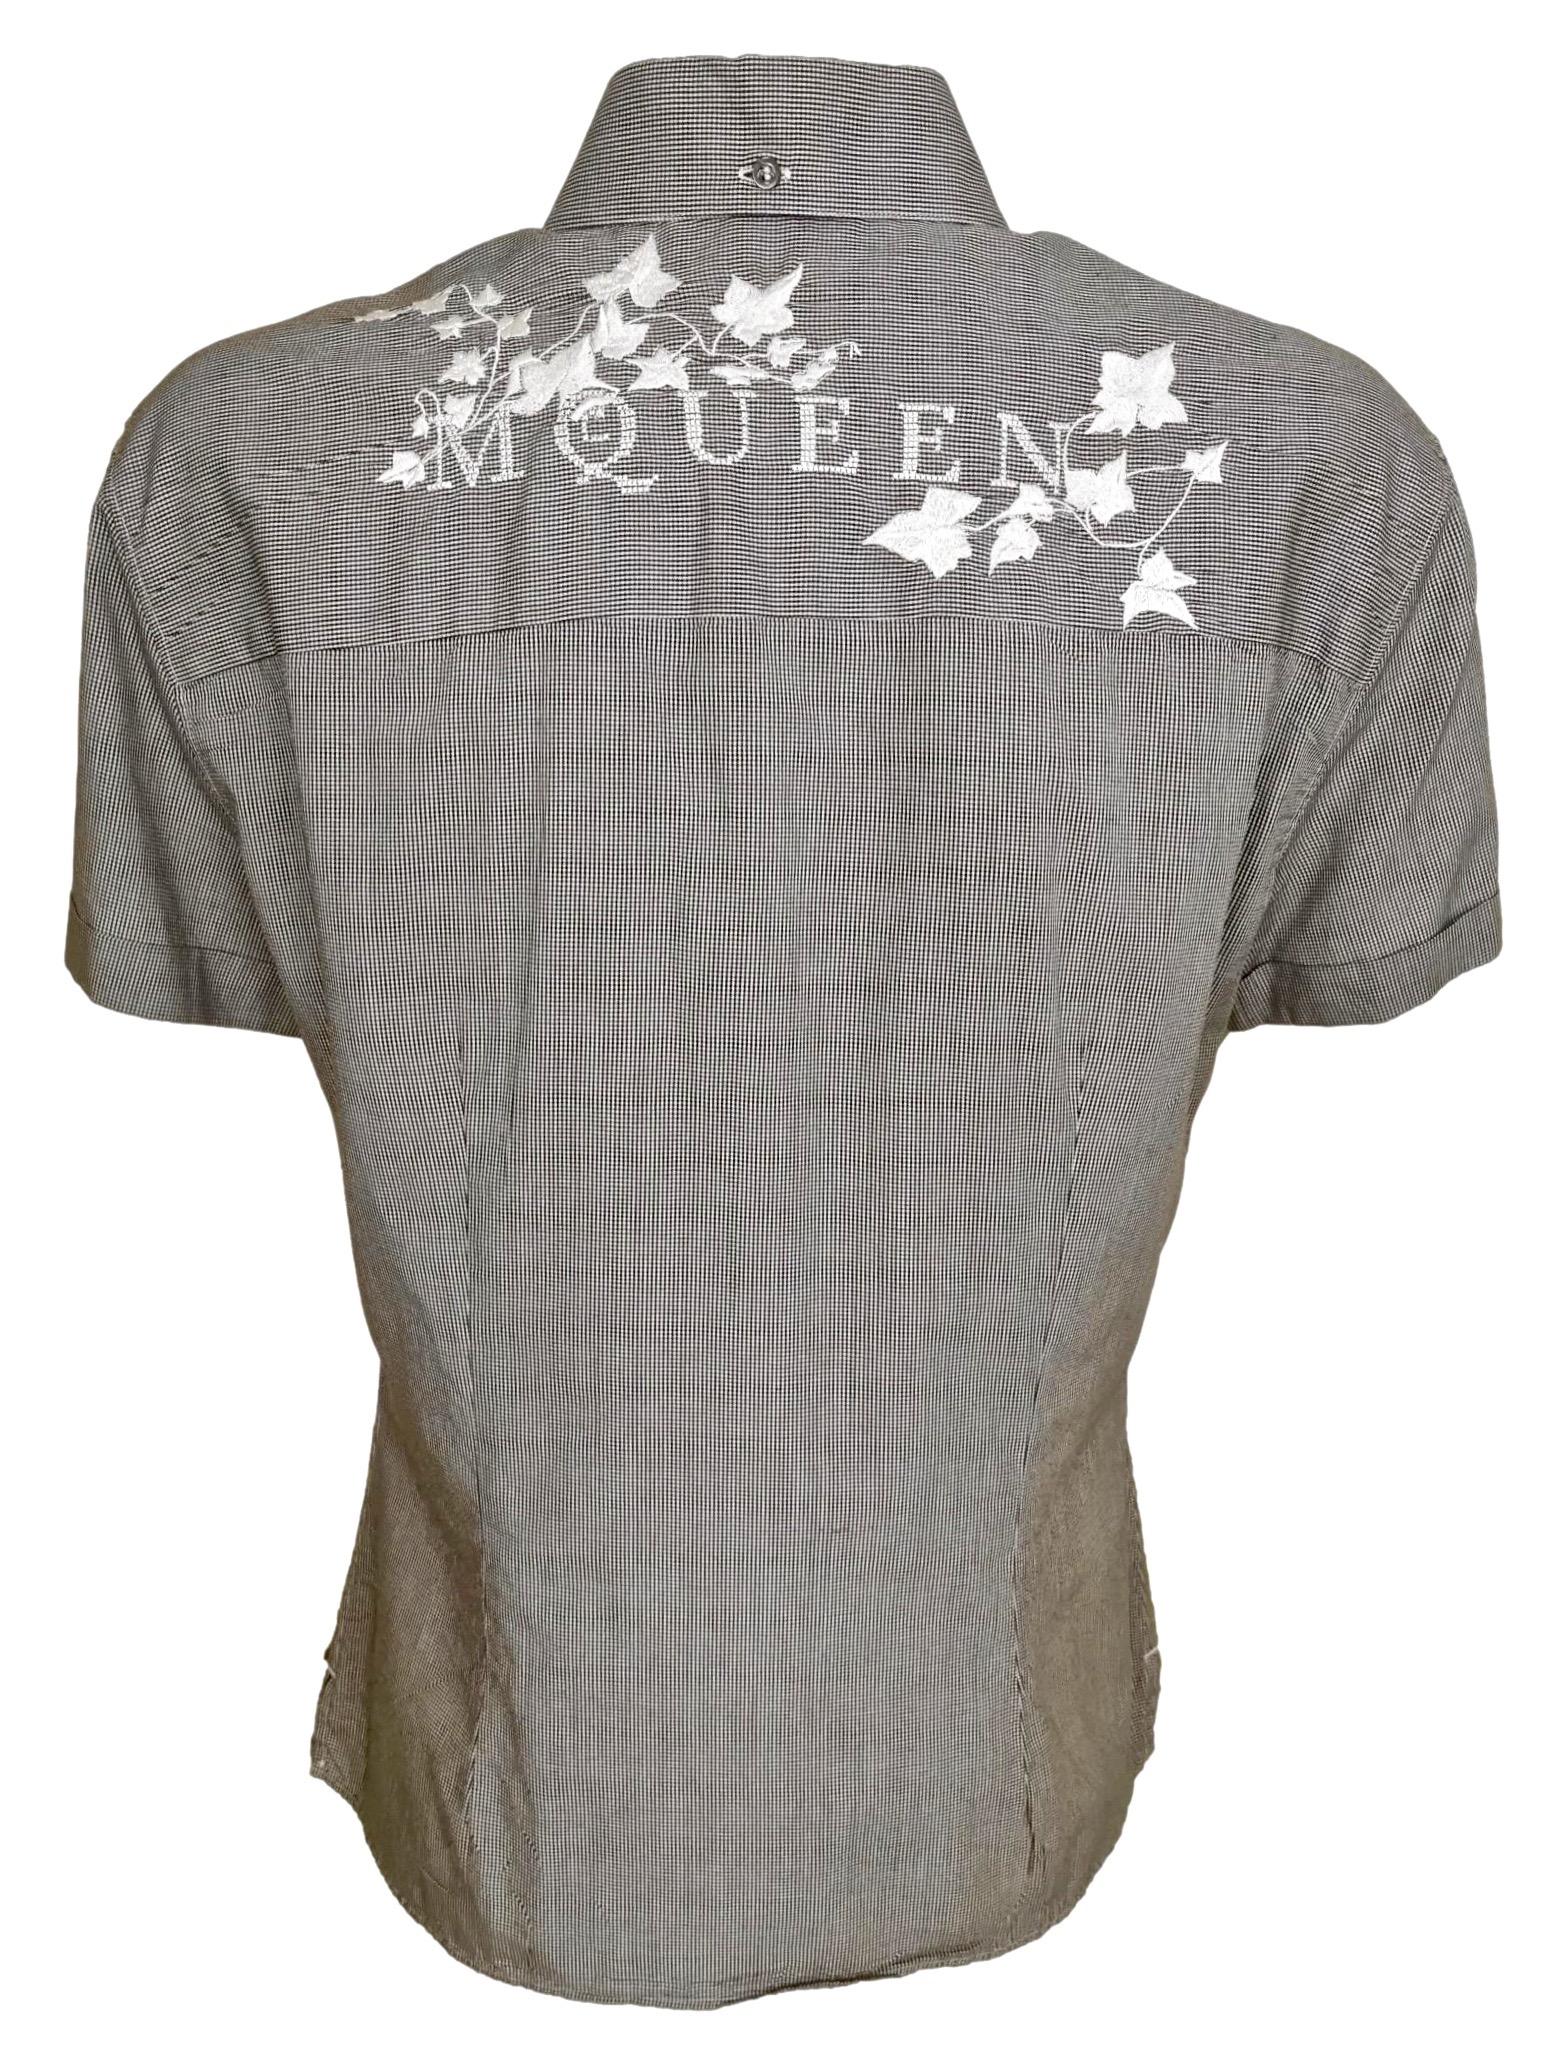 Alexander McQueen Early 1990s Ivy Leaf Embroidered Logo Shirt For Sale 3